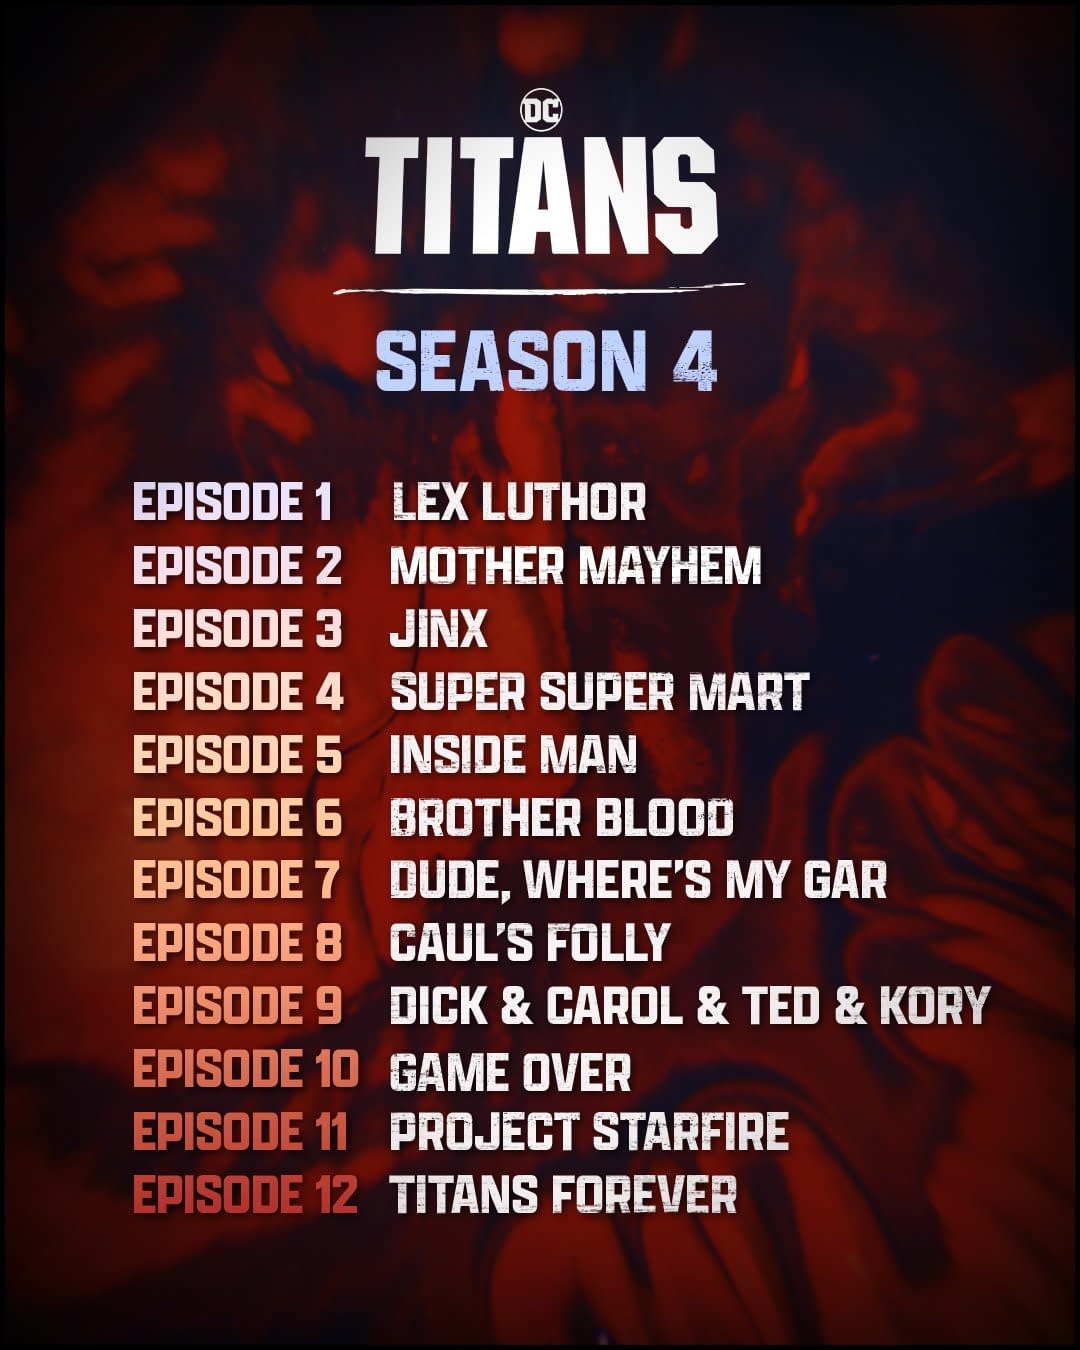 Titans Season 3 HBO Max Release Date Revealed